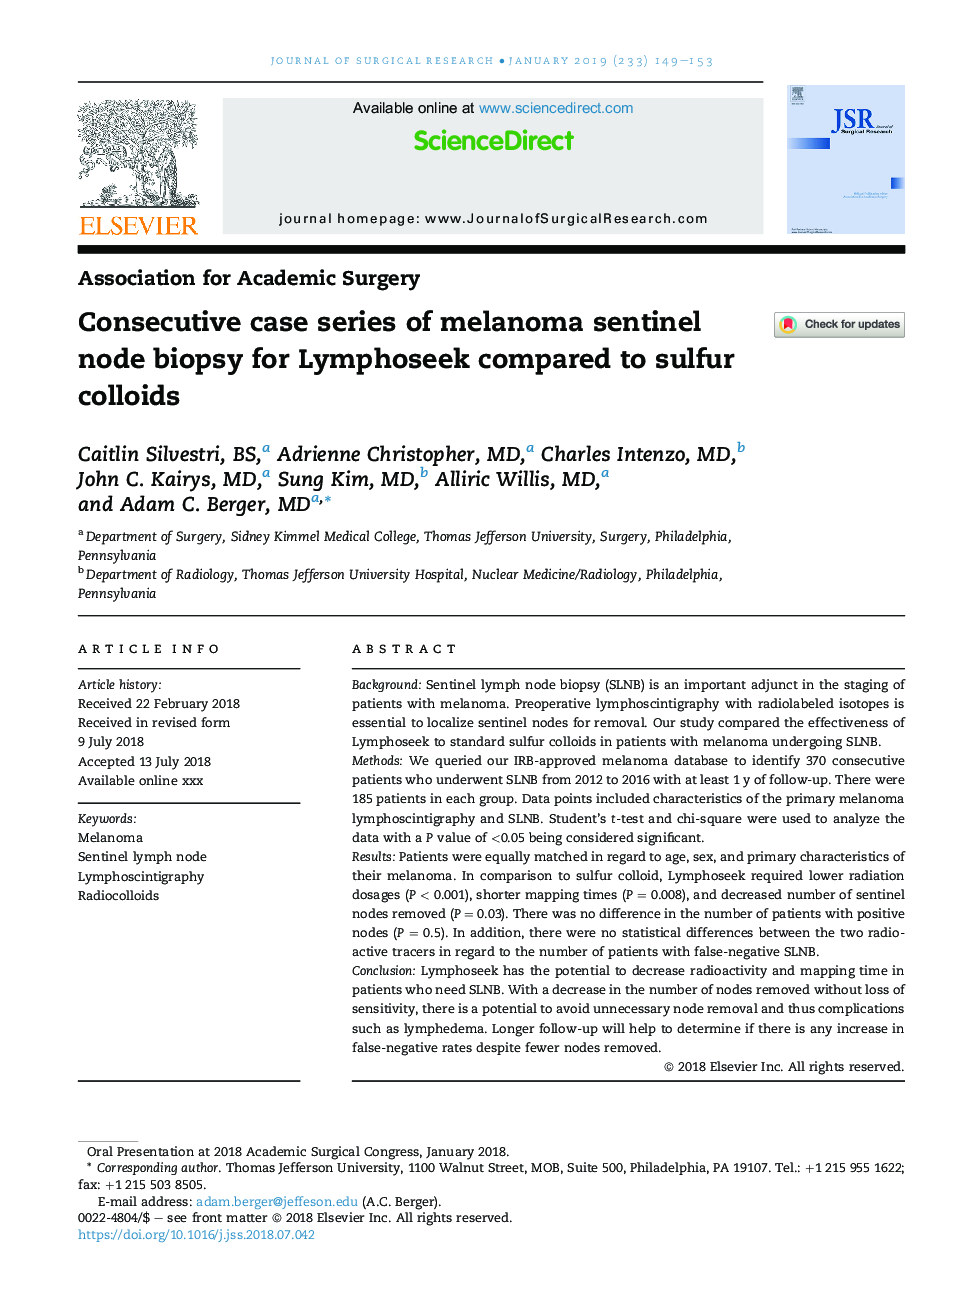 Consecutive case series of melanoma sentinel node biopsy for Lymphoseek compared to sulfur colloids